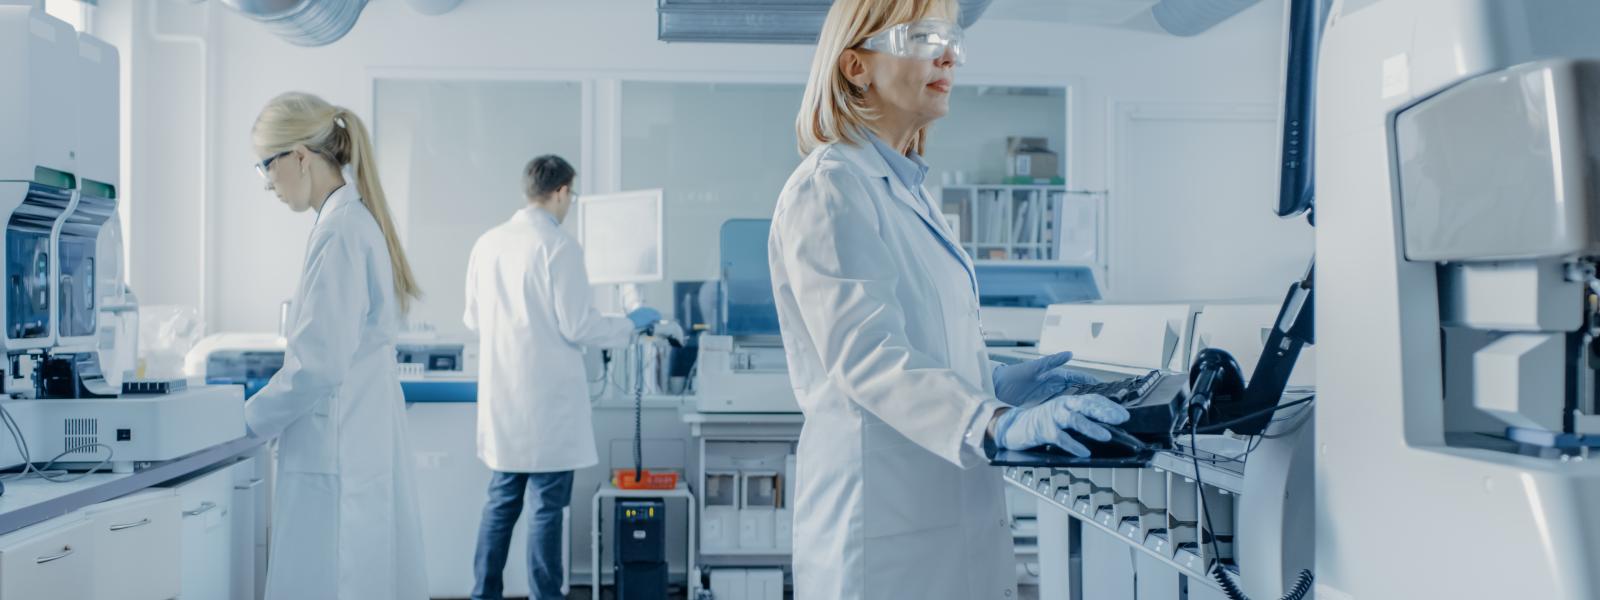 Image of people working in a laboratory environment